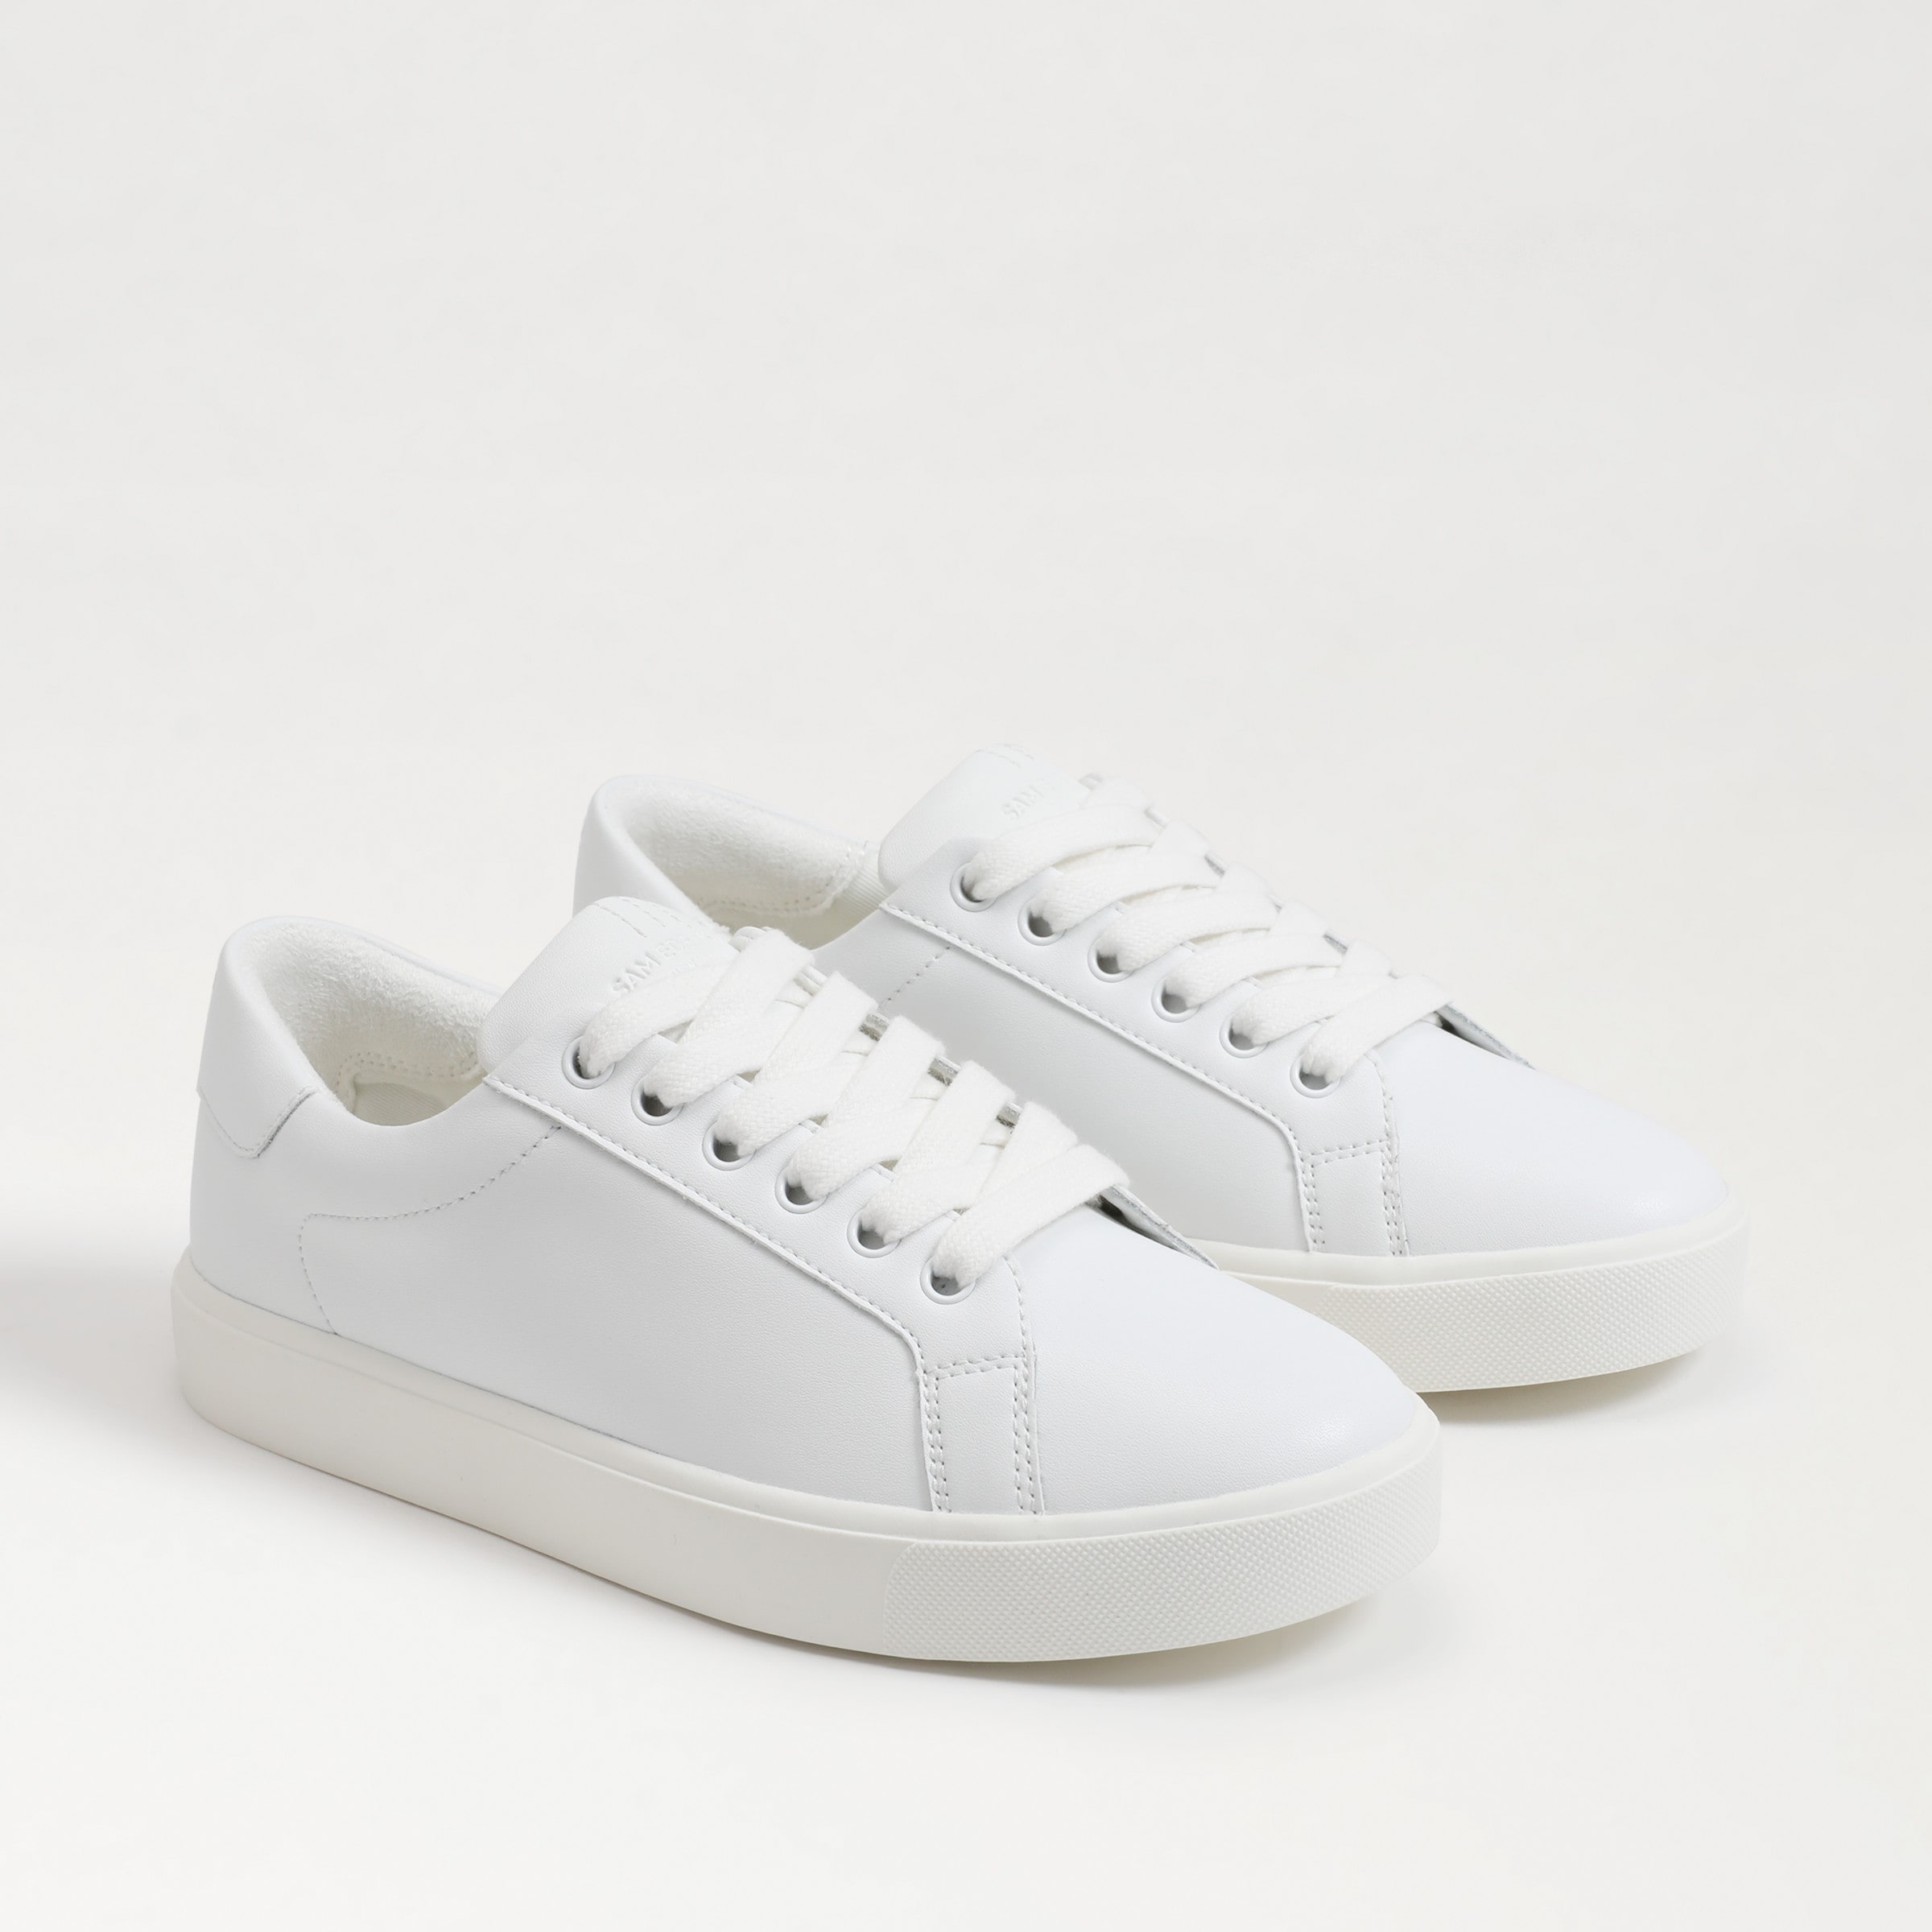 Shop Lace Up Sneakers from Sam Edelman